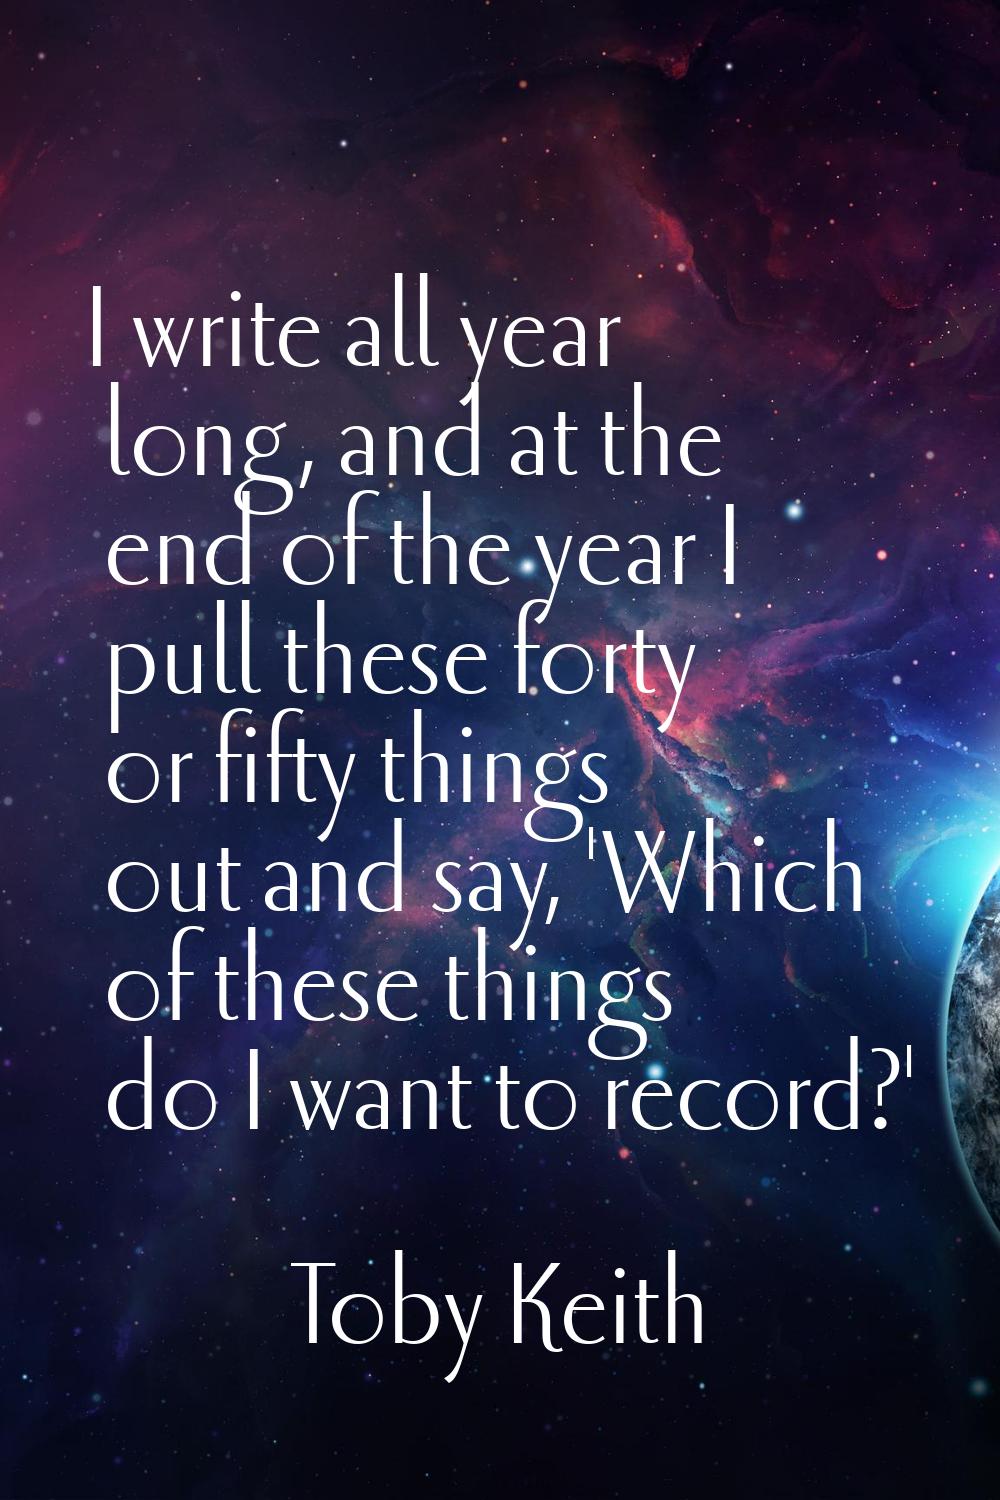 I write all year long, and at the end of the year I pull these forty or fifty things out and say, '